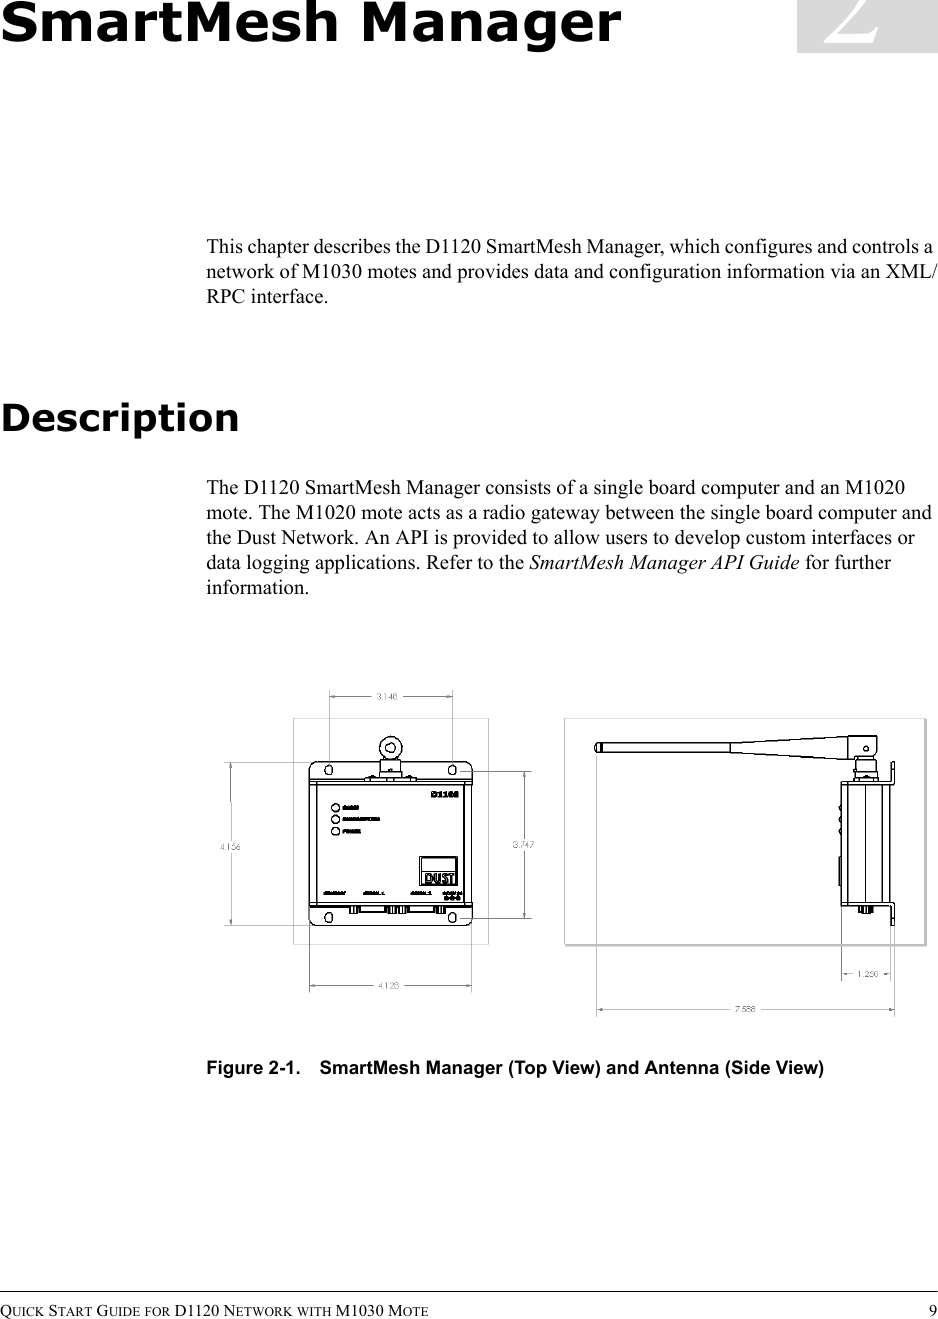 QUICK START GUIDE FOR D1120 NETWORK WITH M1030 MOTE 92SmartMesh ManagerThis chapter describes the D1120 SmartMesh Manager, which configures and controls a network of M1030 motes and provides data and configuration information via an XML/RPC interface.DescriptionThe D1120 SmartMesh Manager consists of a single board computer and an M1020 mote. The M1020 mote acts as a radio gateway between the single board computer and the Dust Network. An API is provided to allow users to develop custom interfaces or data logging applications. Refer to the SmartMesh Manager API Guide for further information.Figure 2-1. SmartMesh Manager (Top View) and Antenna (Side View)